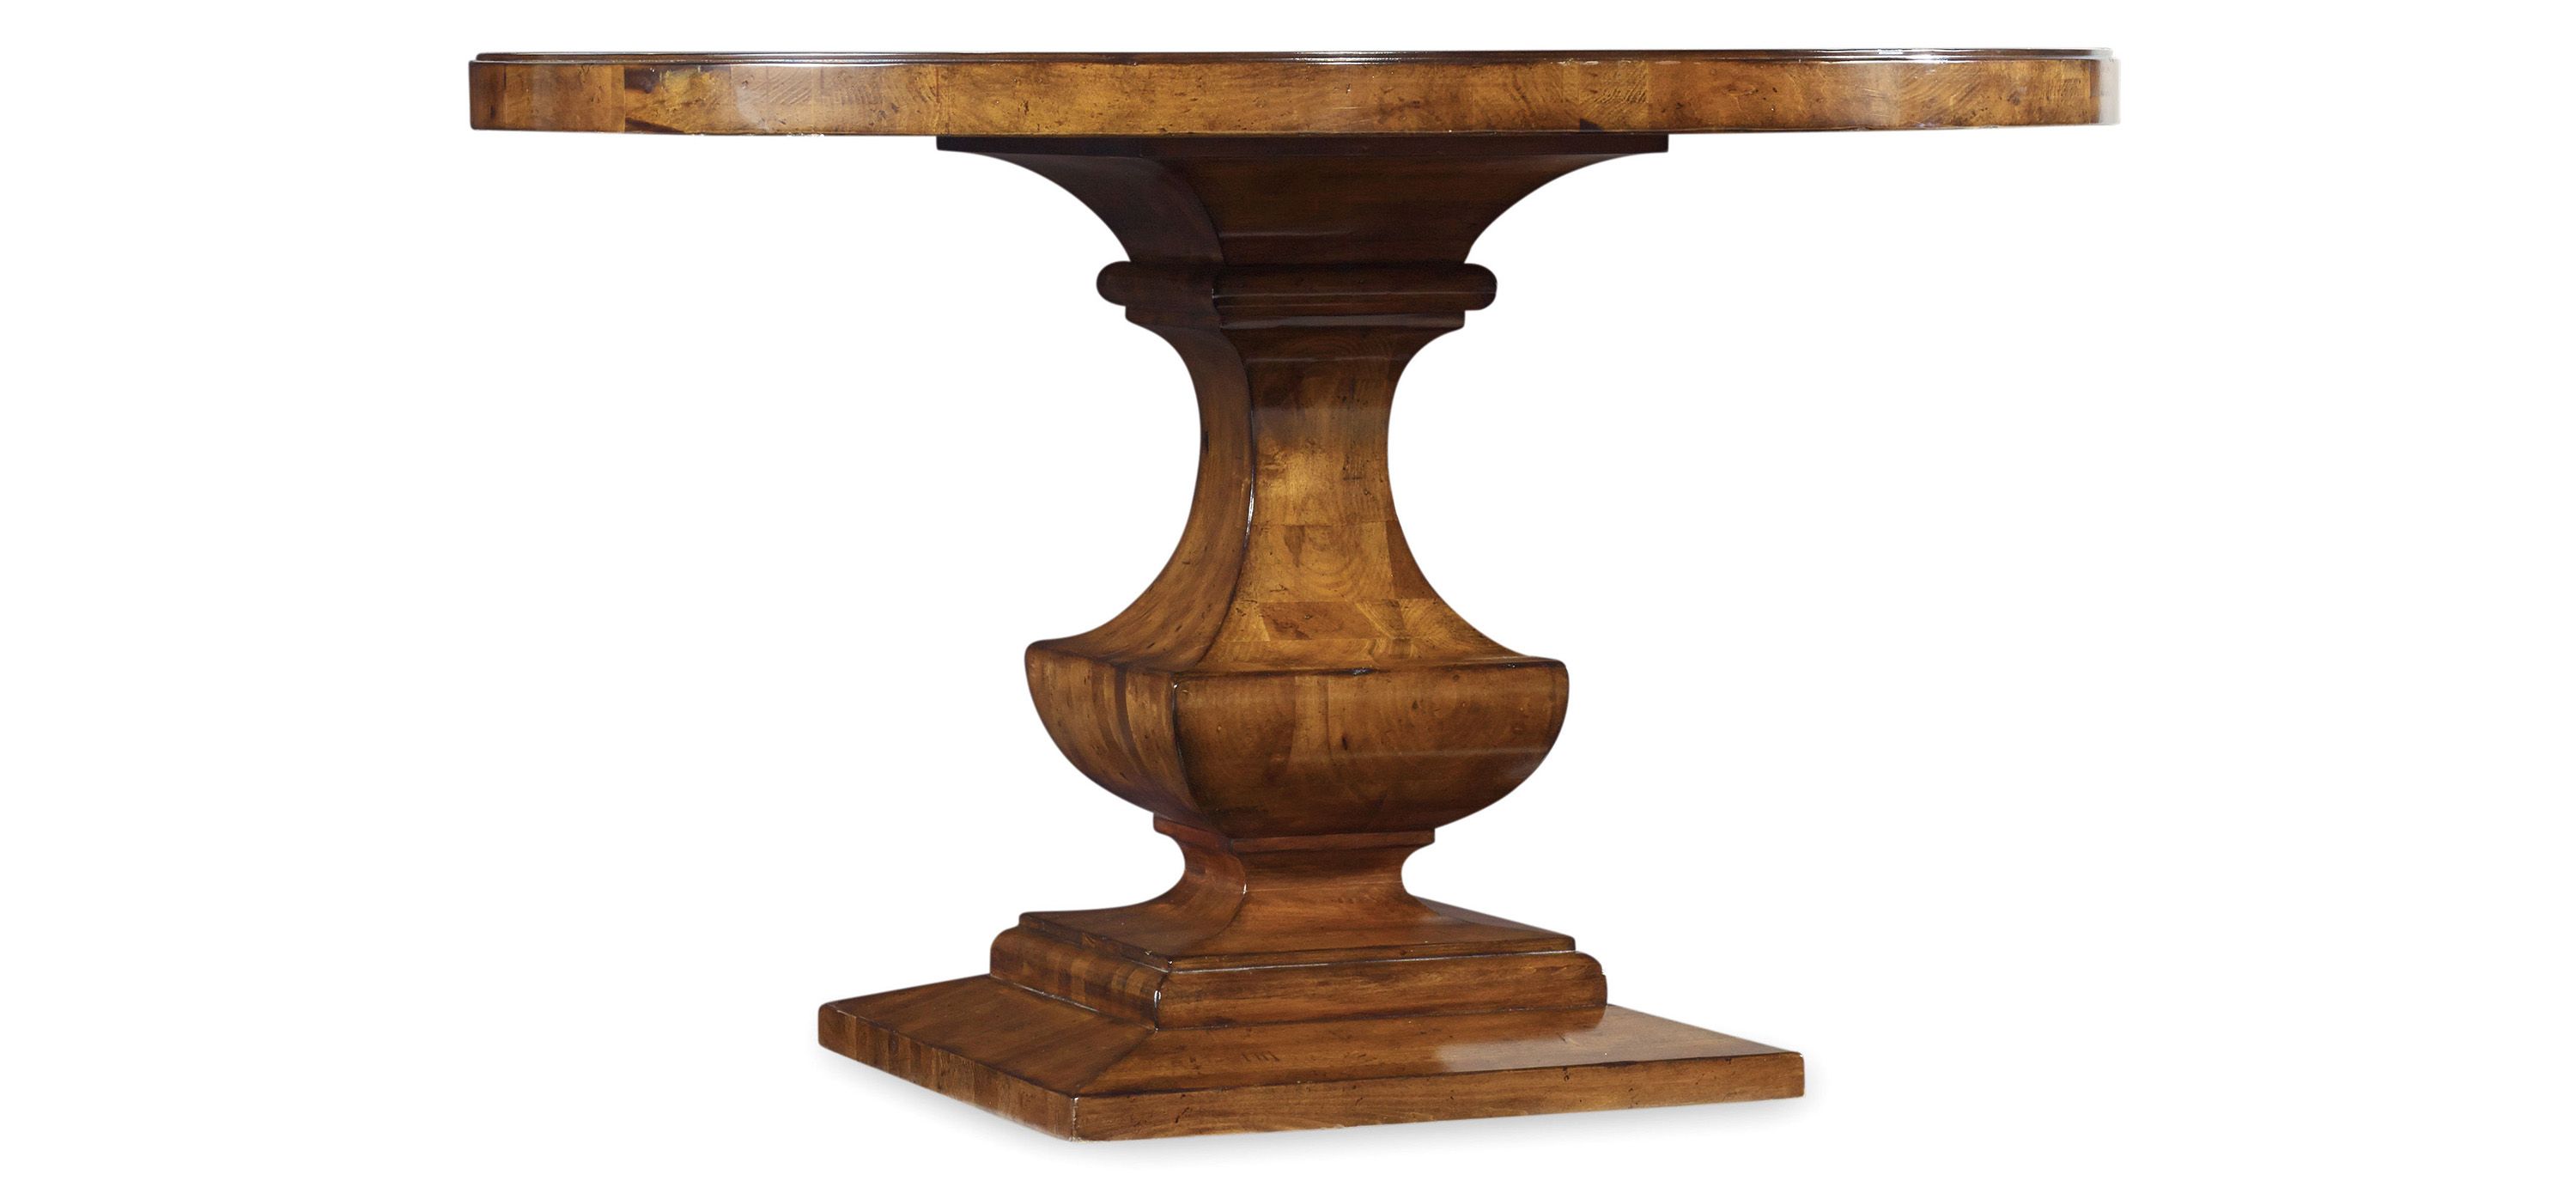 Tynecastle Round Pedestal Dining Table